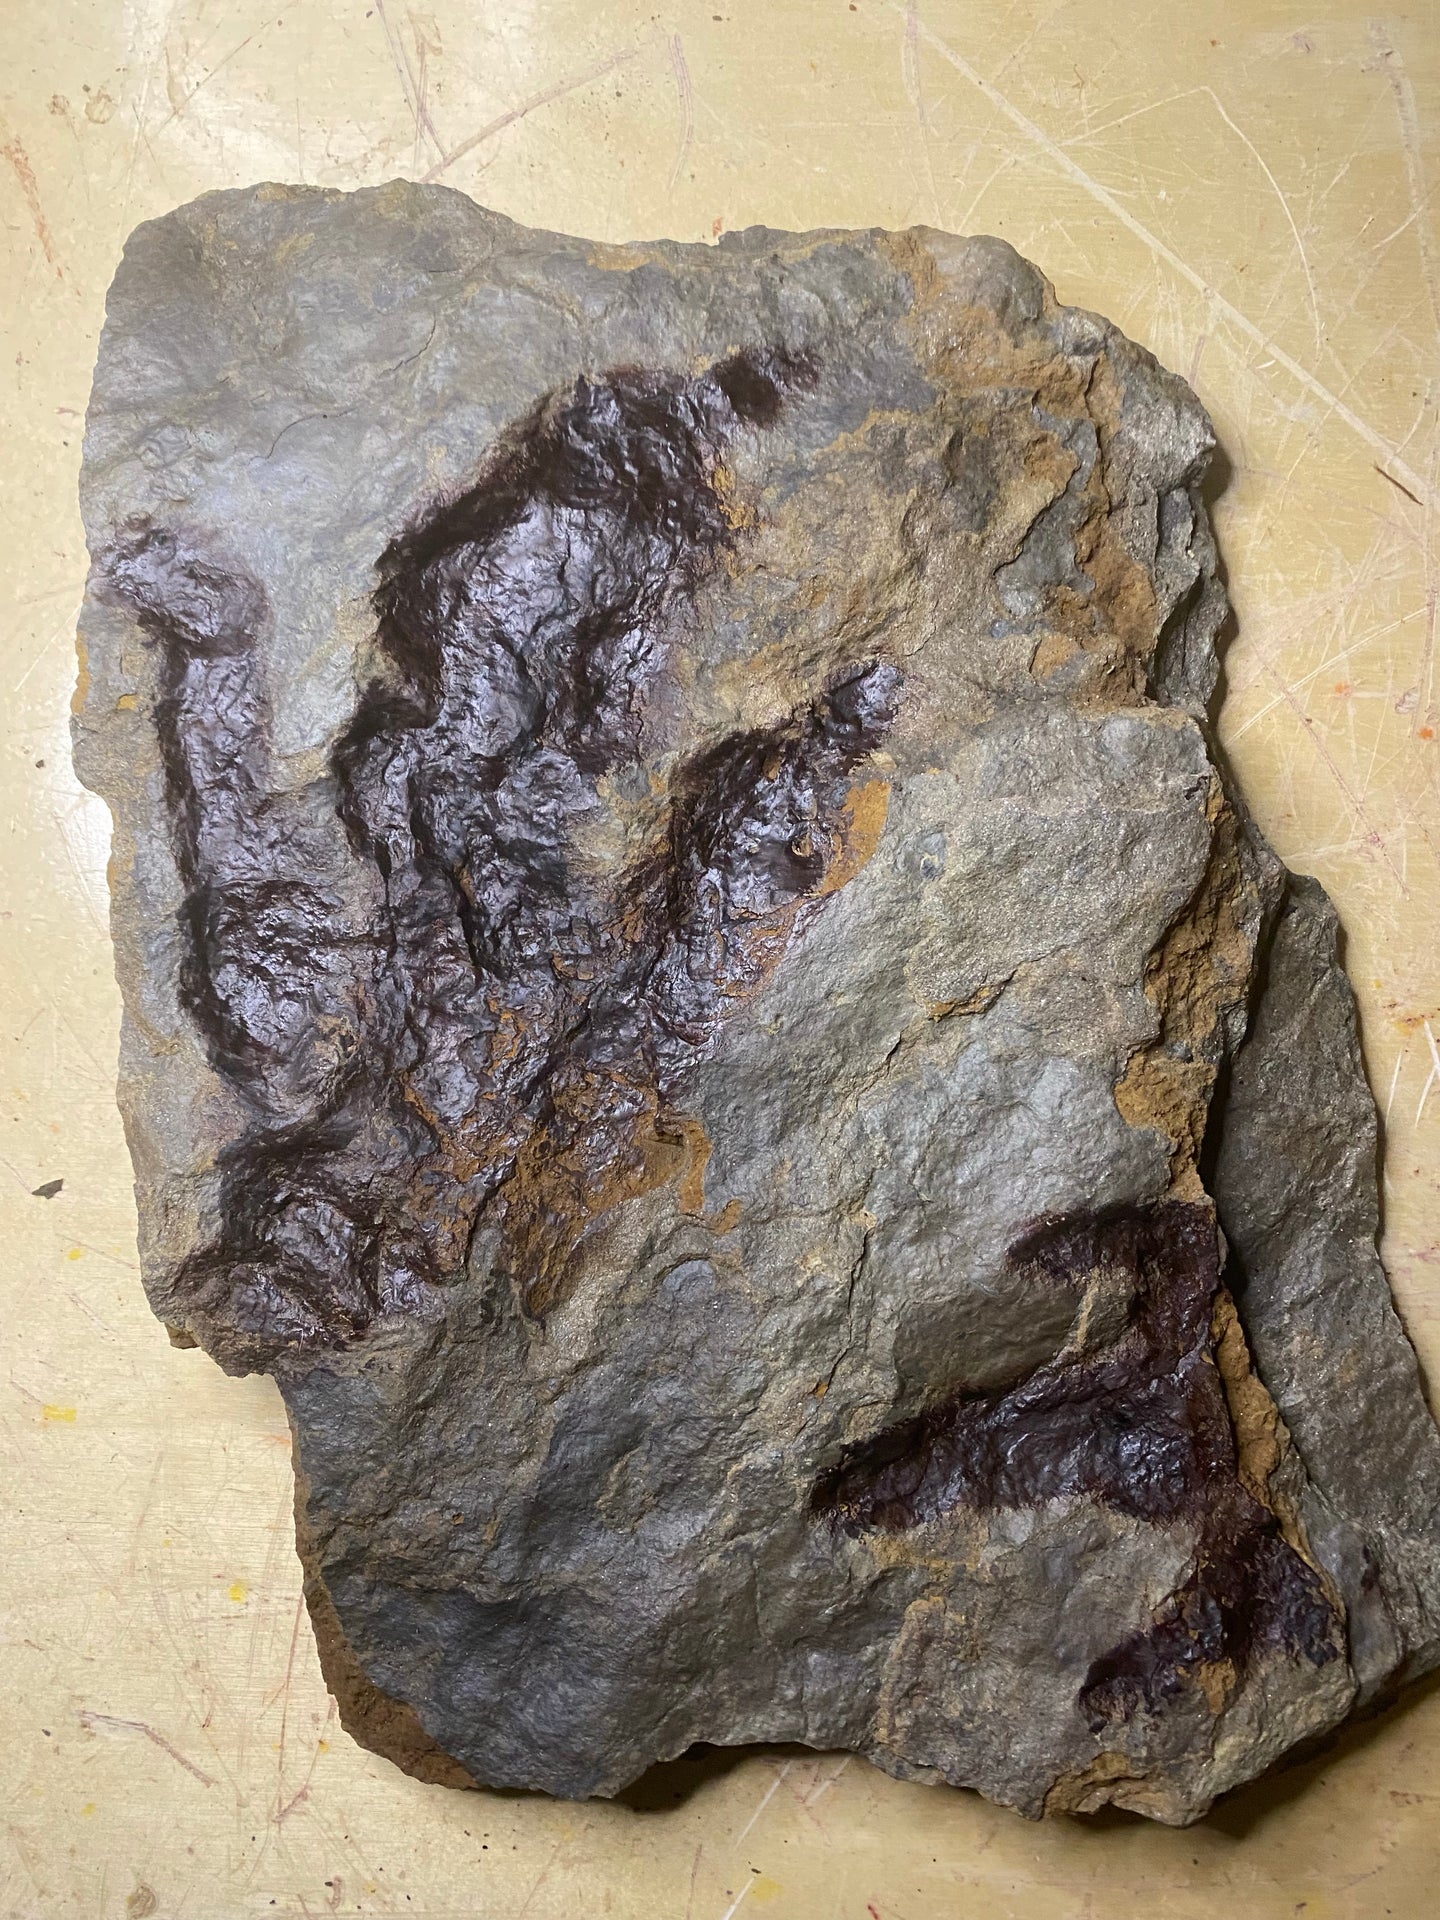 Awesome Fossil Dinosaur Footprints for Sale - Fossil Daddy